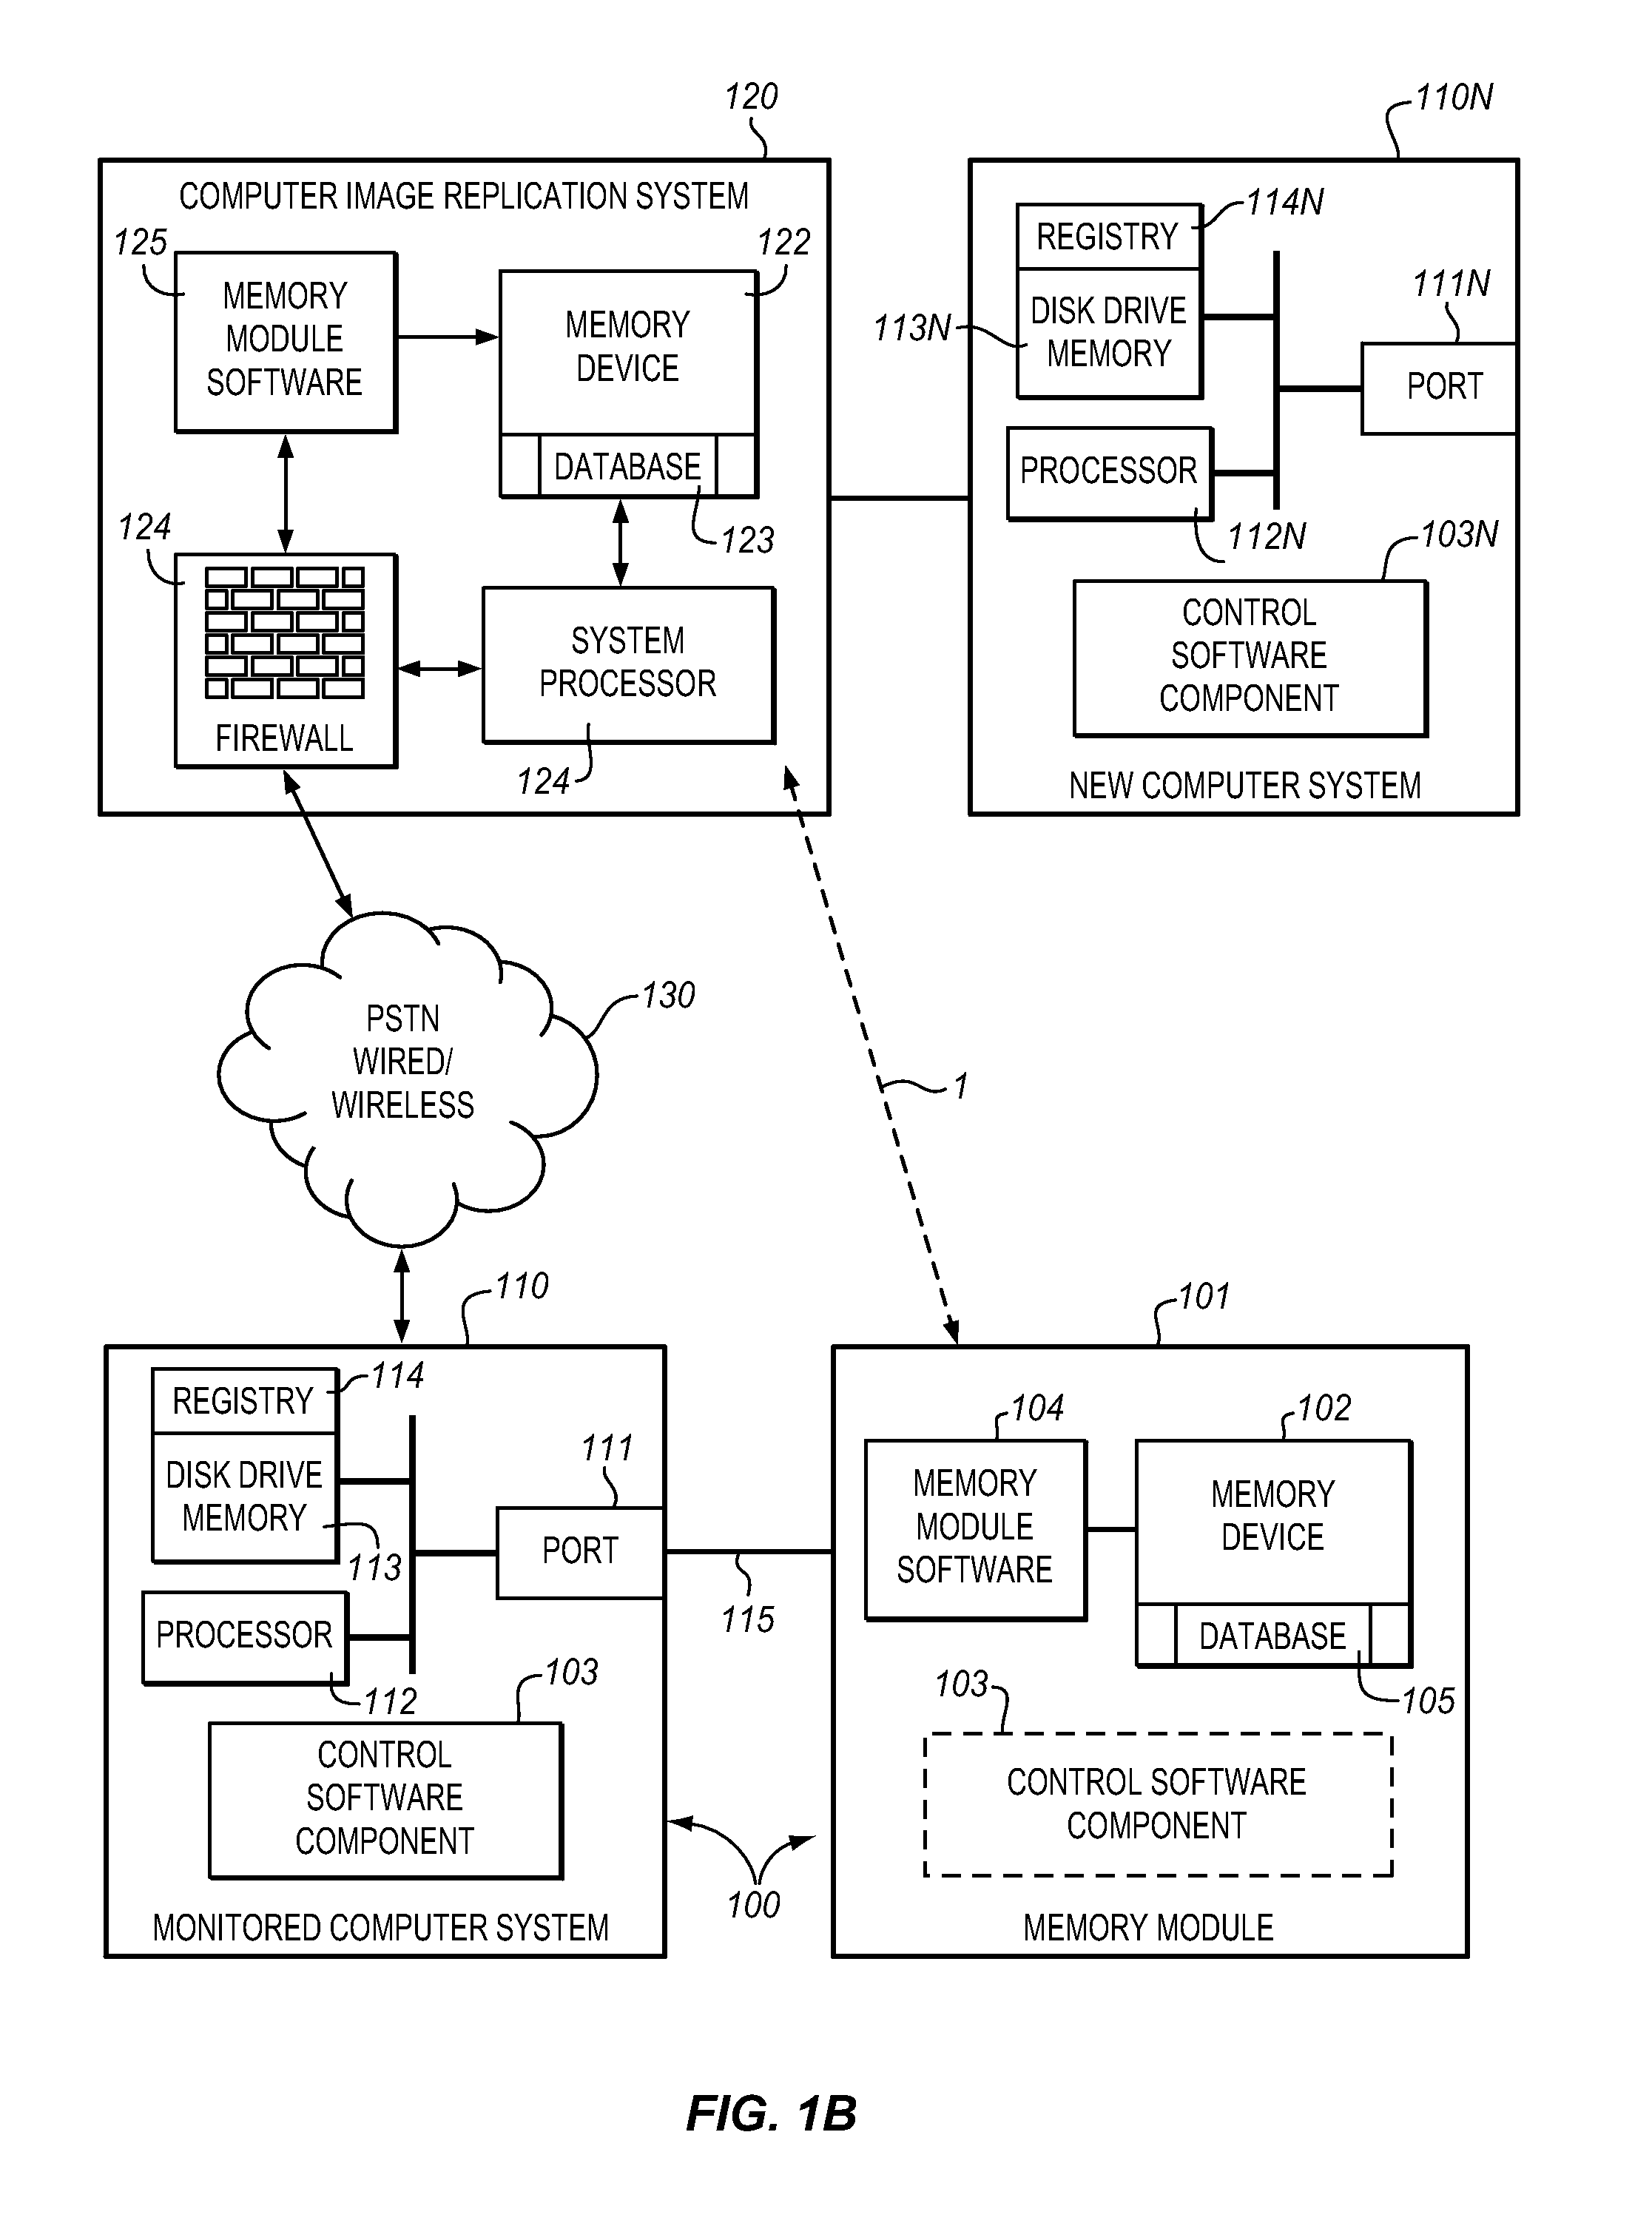 System for automatically replicating a customer's personalized computer system image on a new computer system